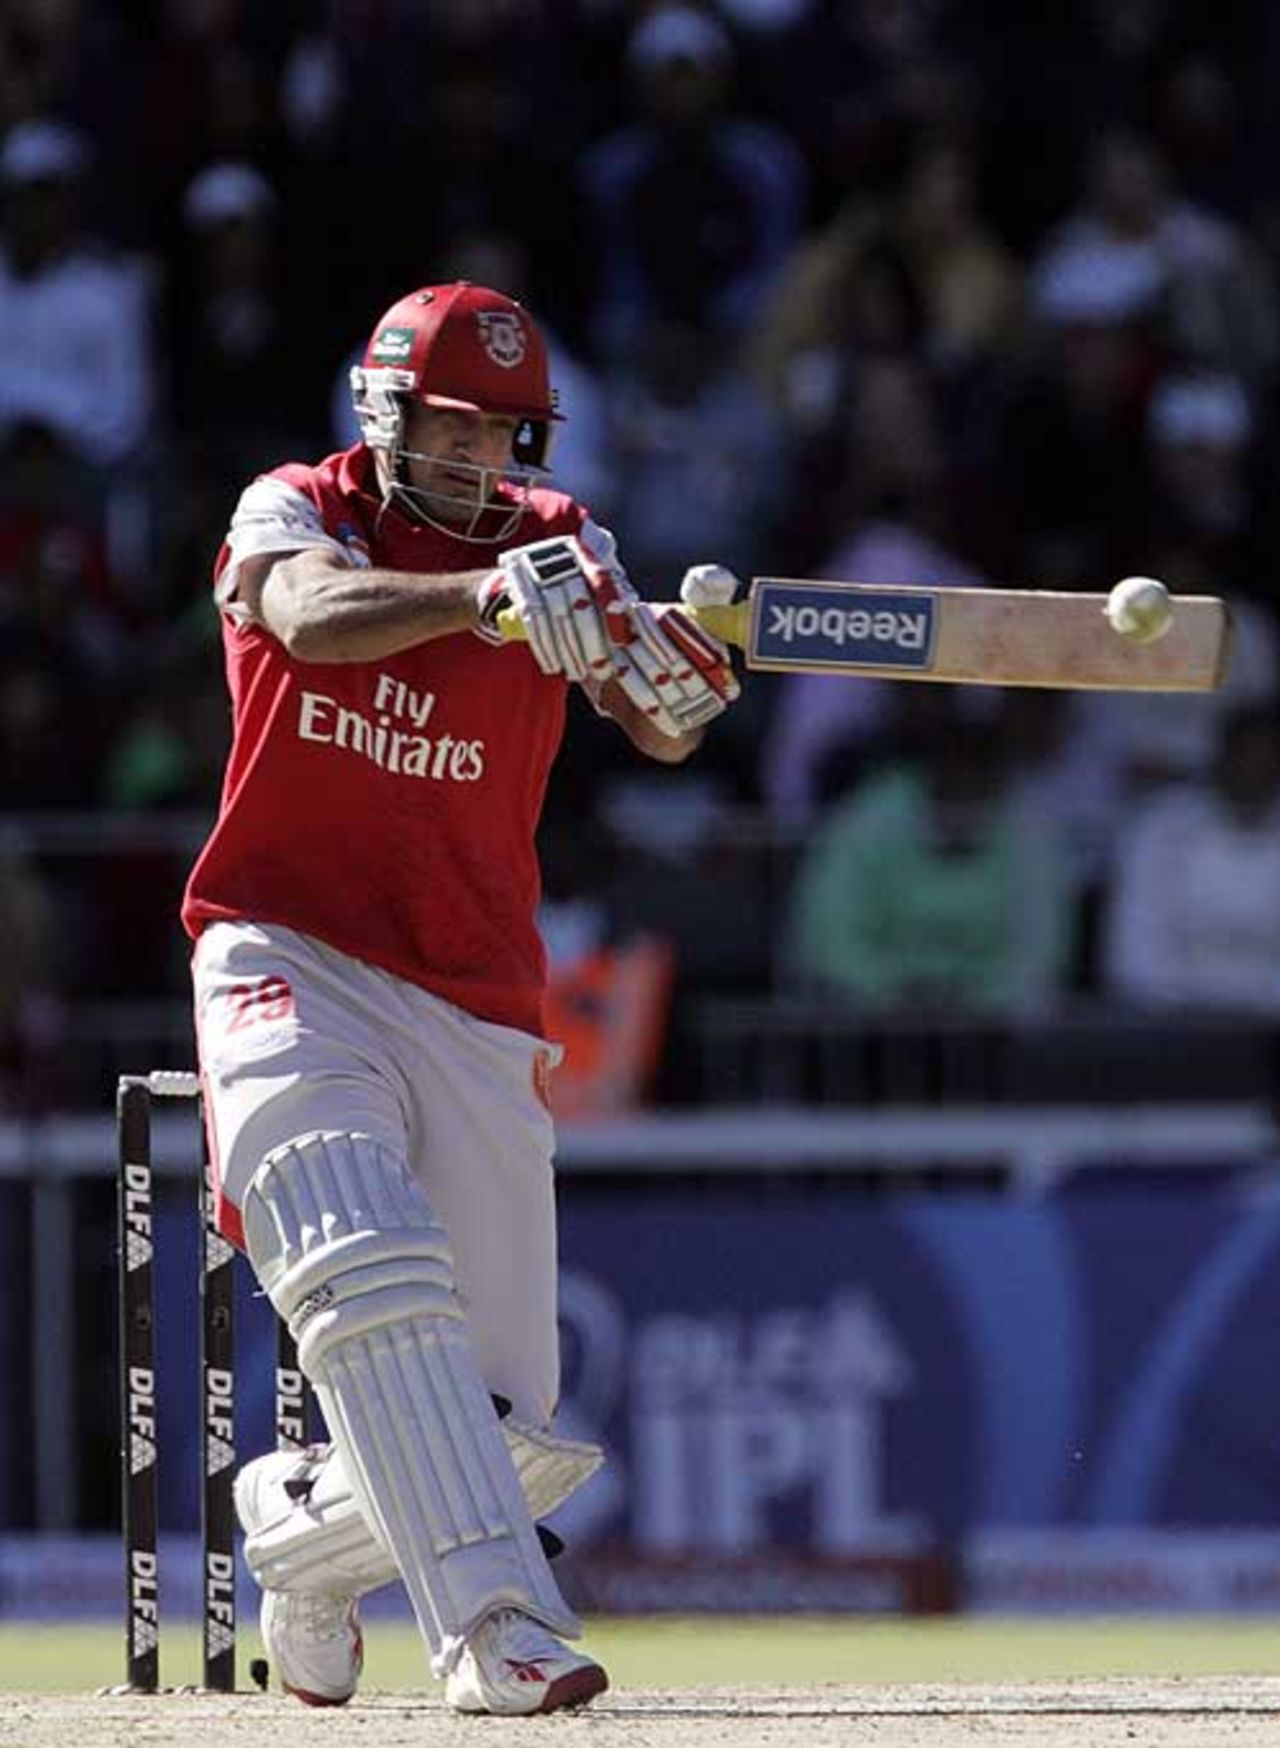 Irfan Pathan goes for the pull, Deccan Chargers v Kings XI Punjab, IPL, 49th match, Johannesburg, May 17, 2009